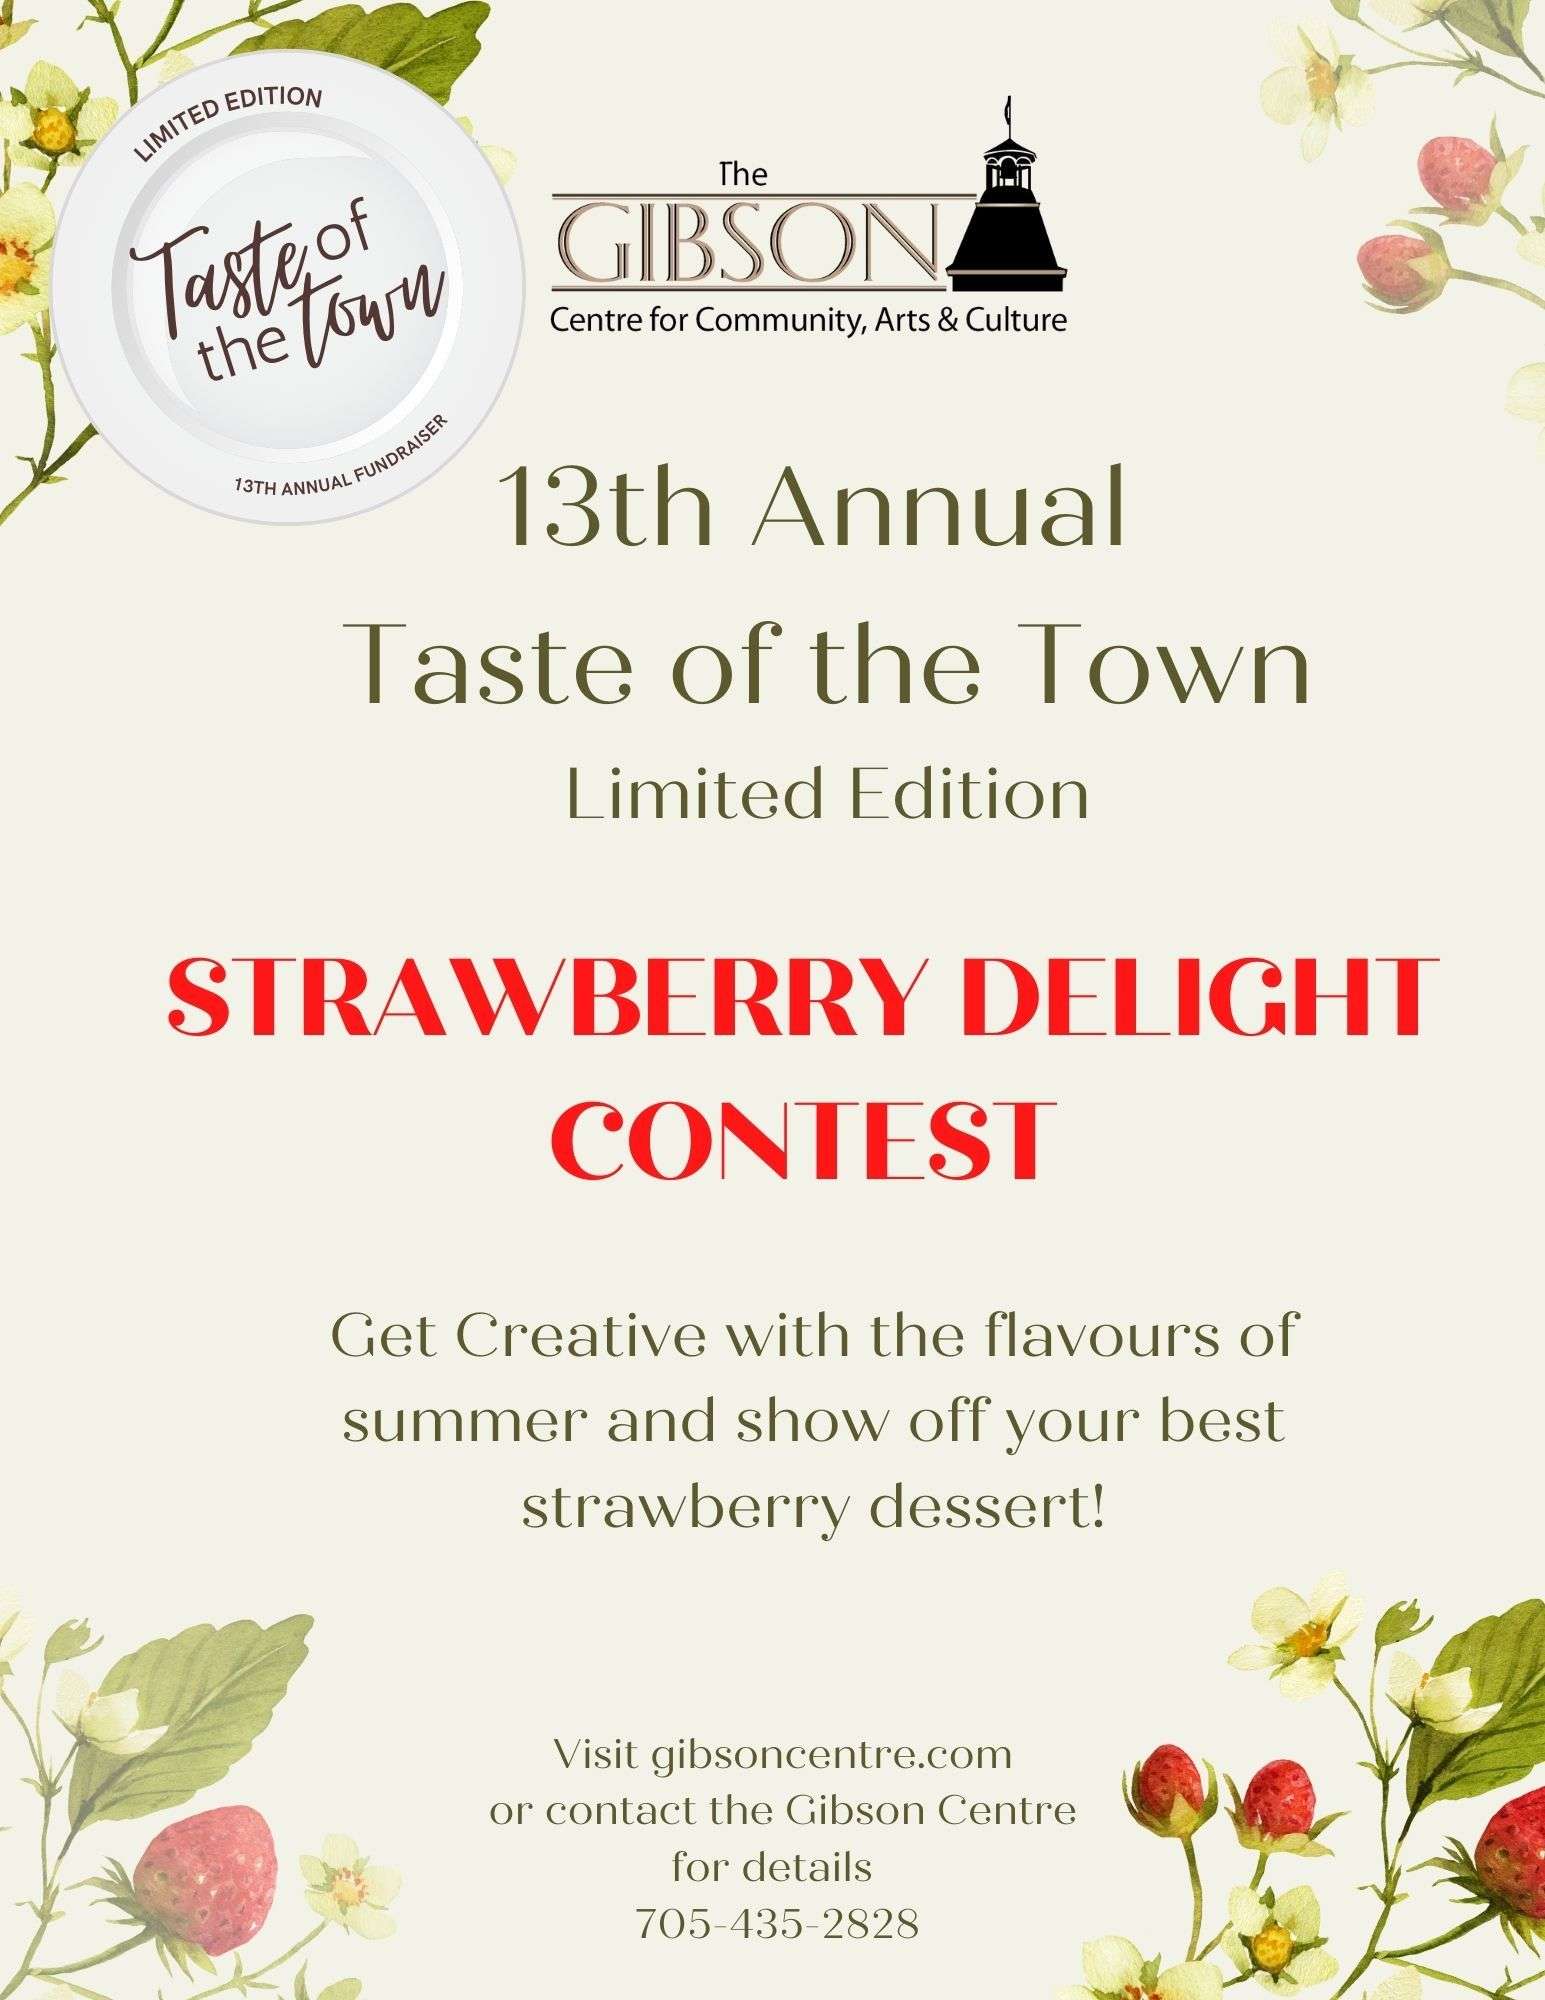 Taste of the Town Strawberry Delight Contest